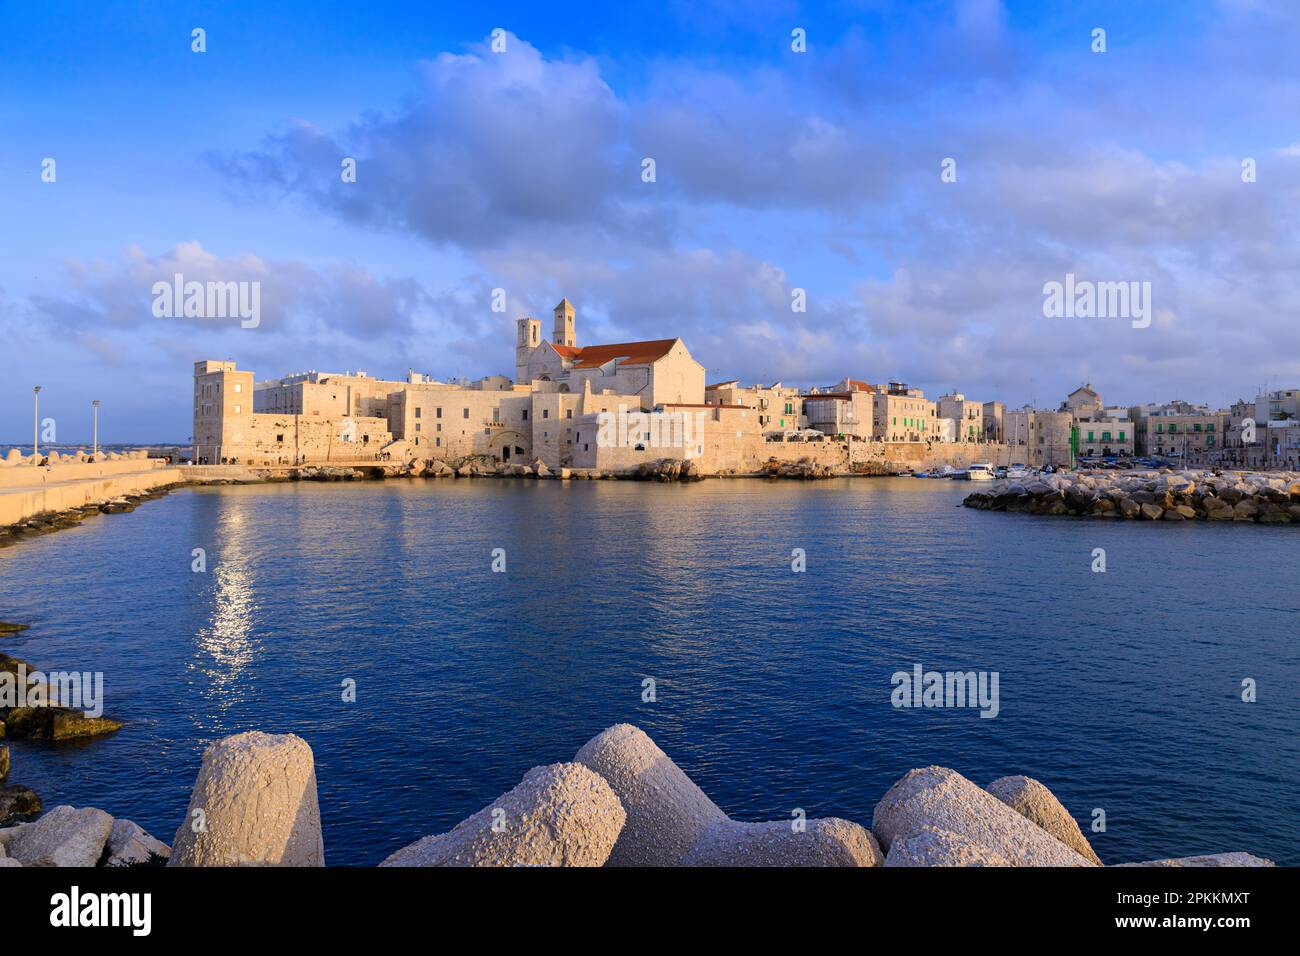 Giovinazzo old town in Apulia, Italy: view of the harbor with the Cathedral of Santa Maria Assunta in Apulian Romanesque style. Stock Photo